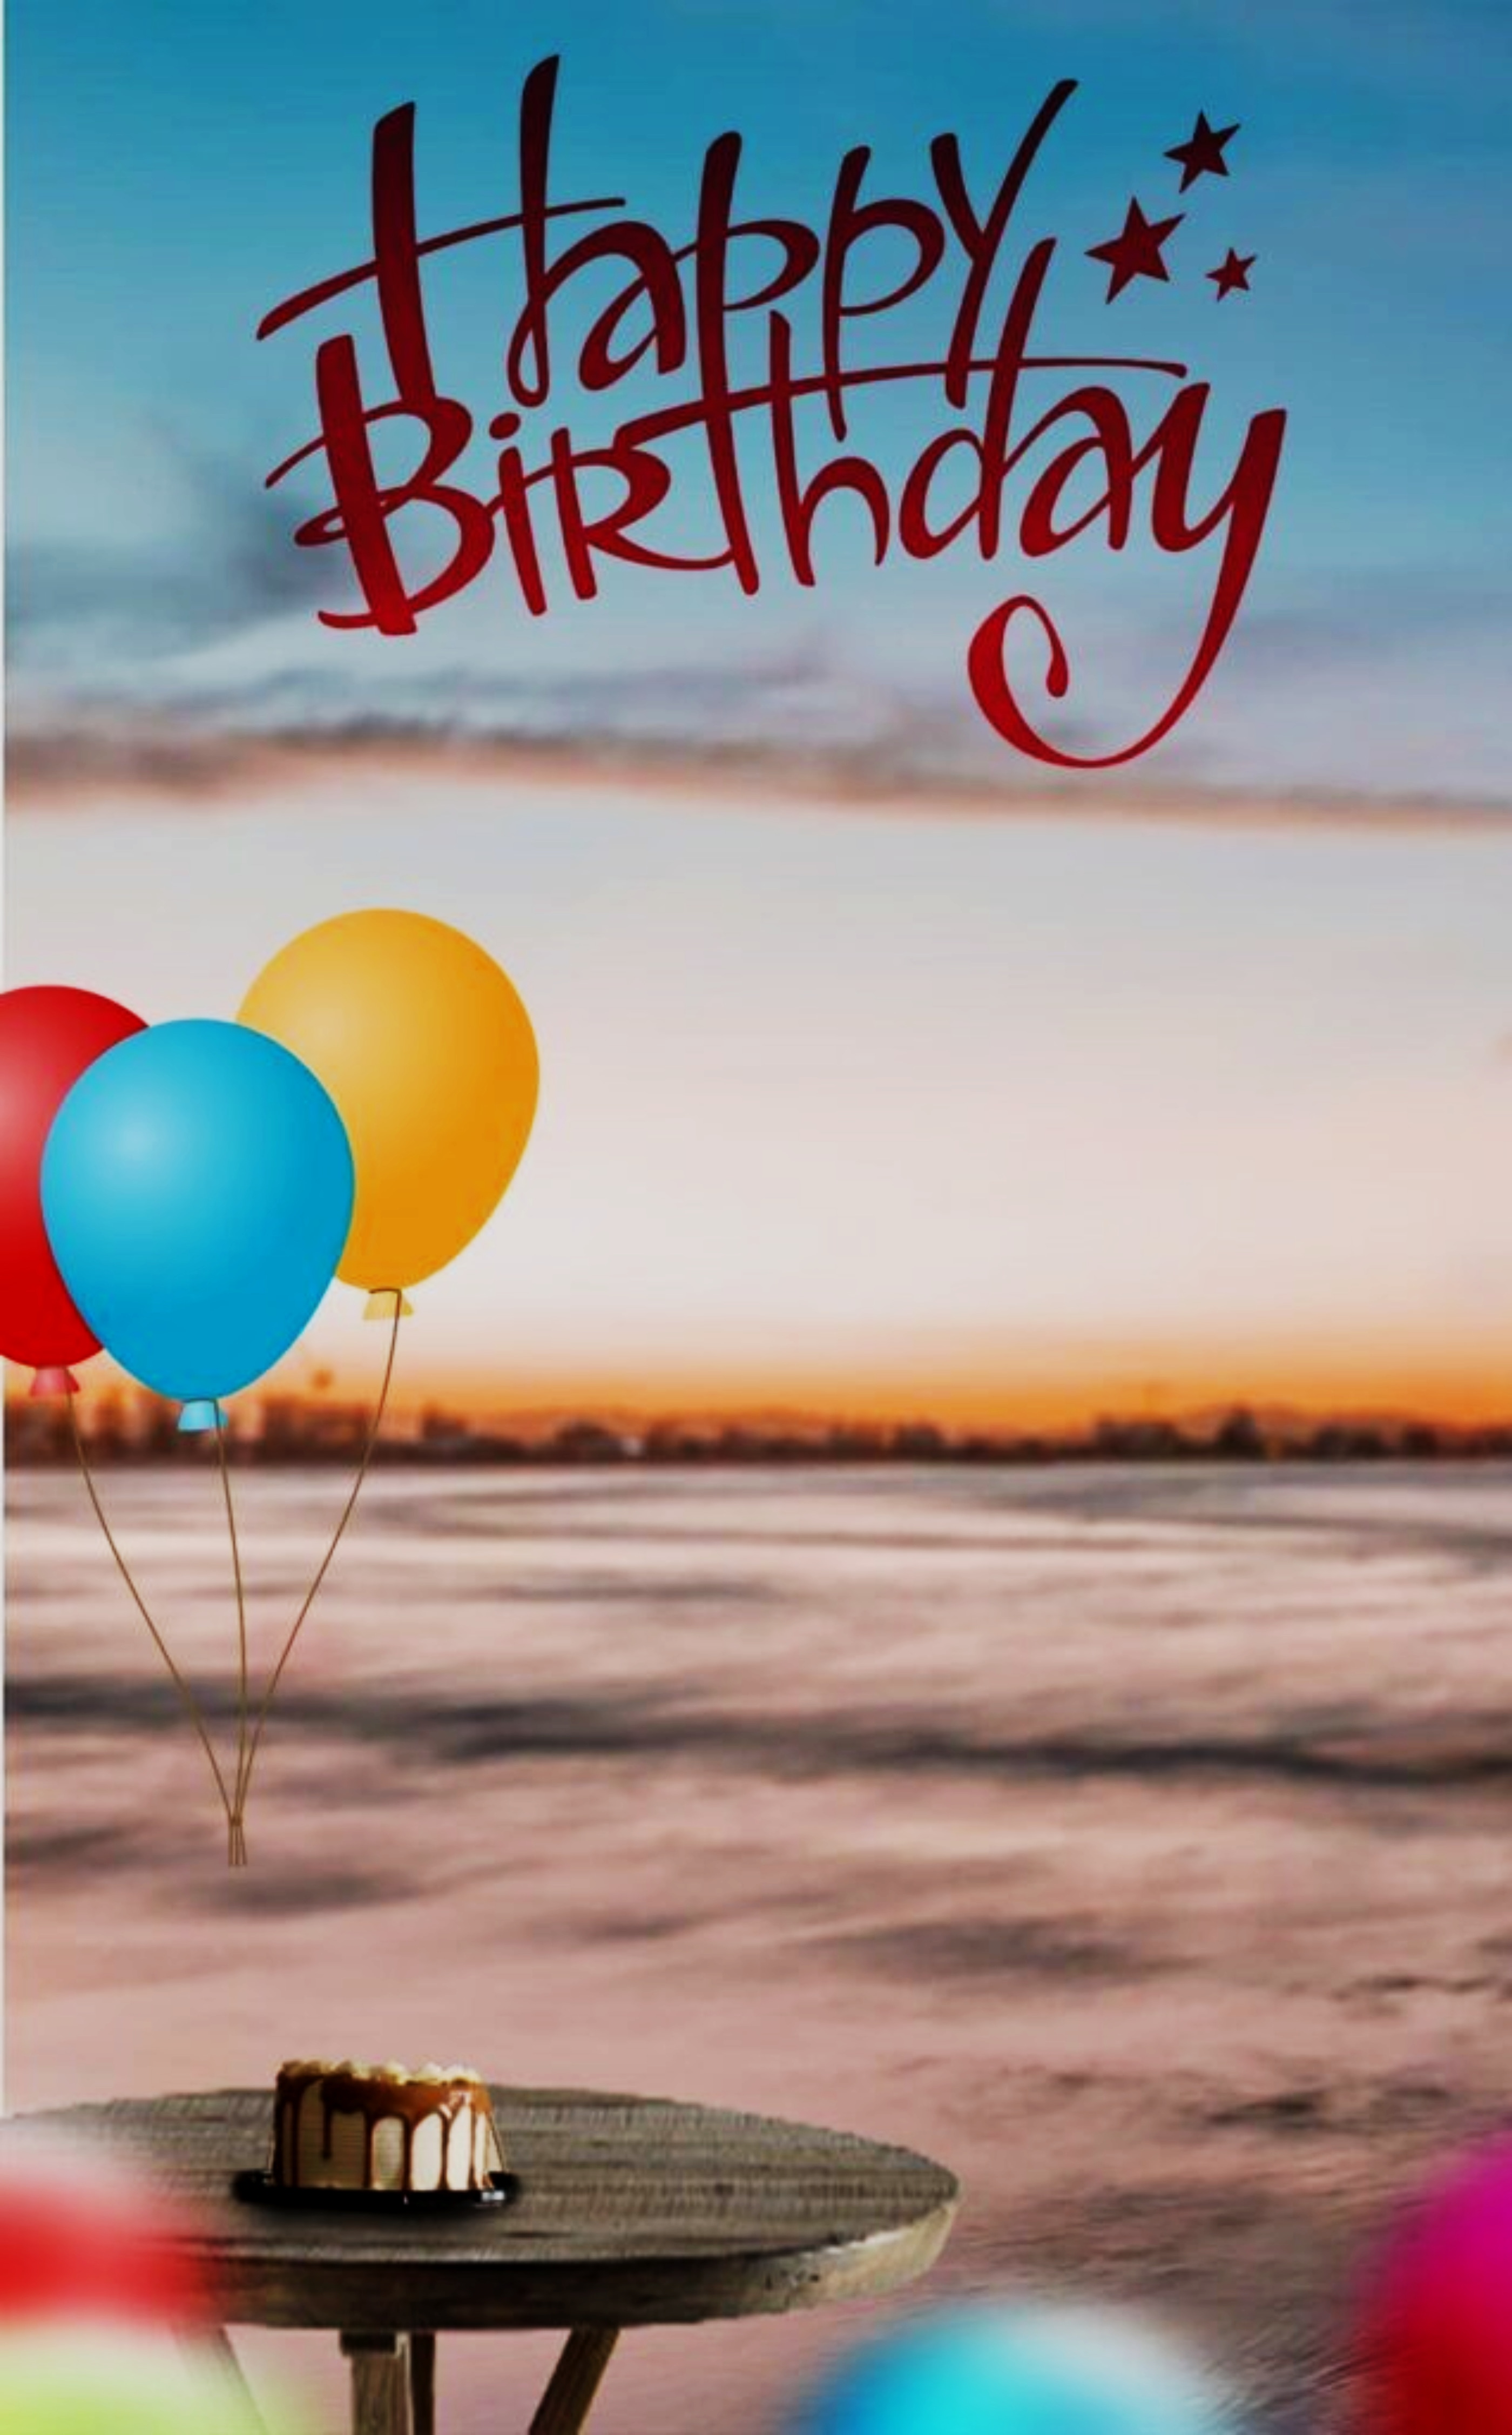 You are currently viewing Happy birthday image editing background download hd